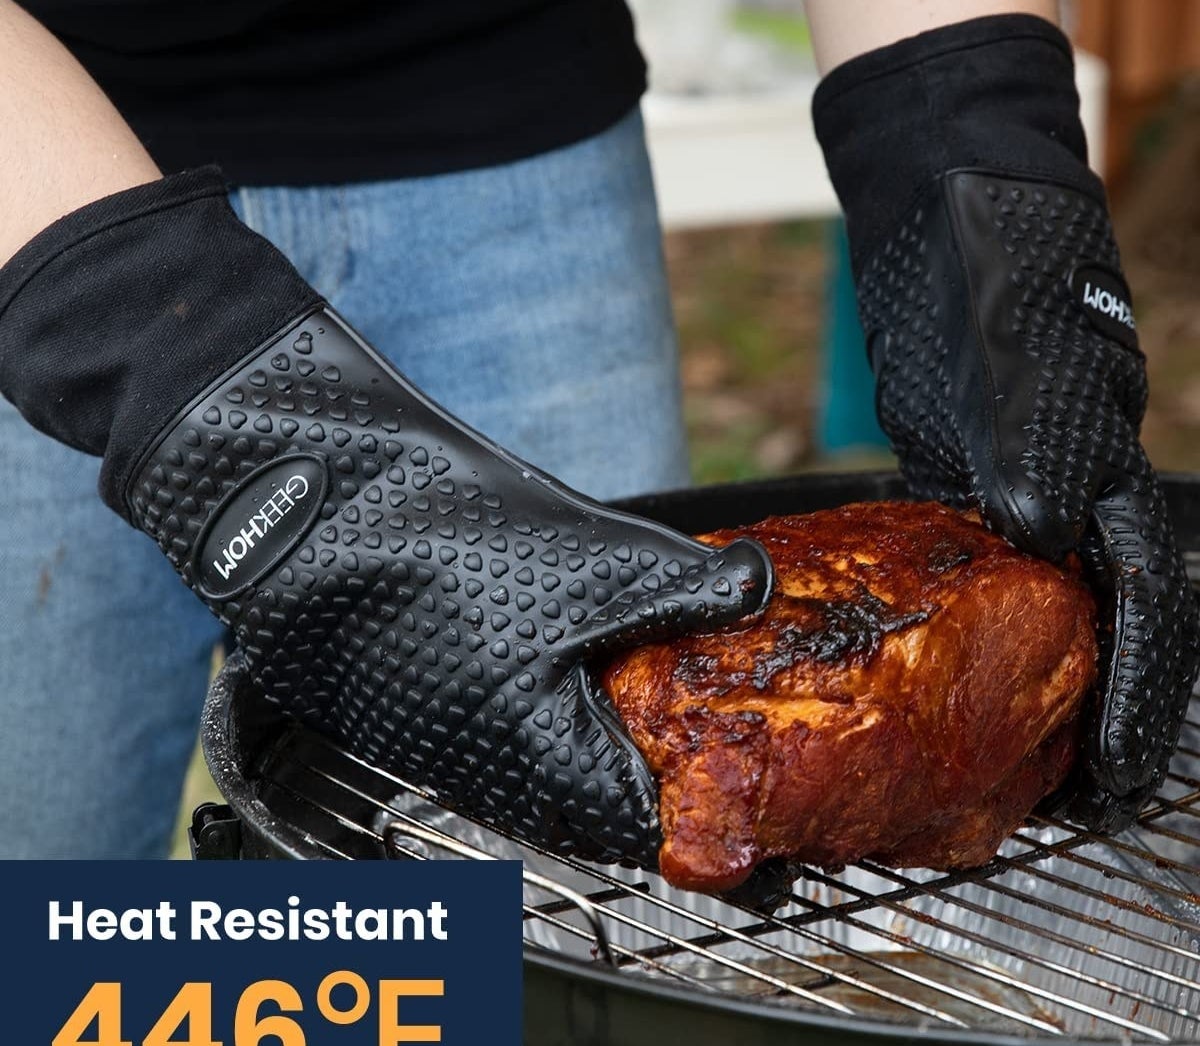 A person wearing the gloves to take a chicken off of a bbq